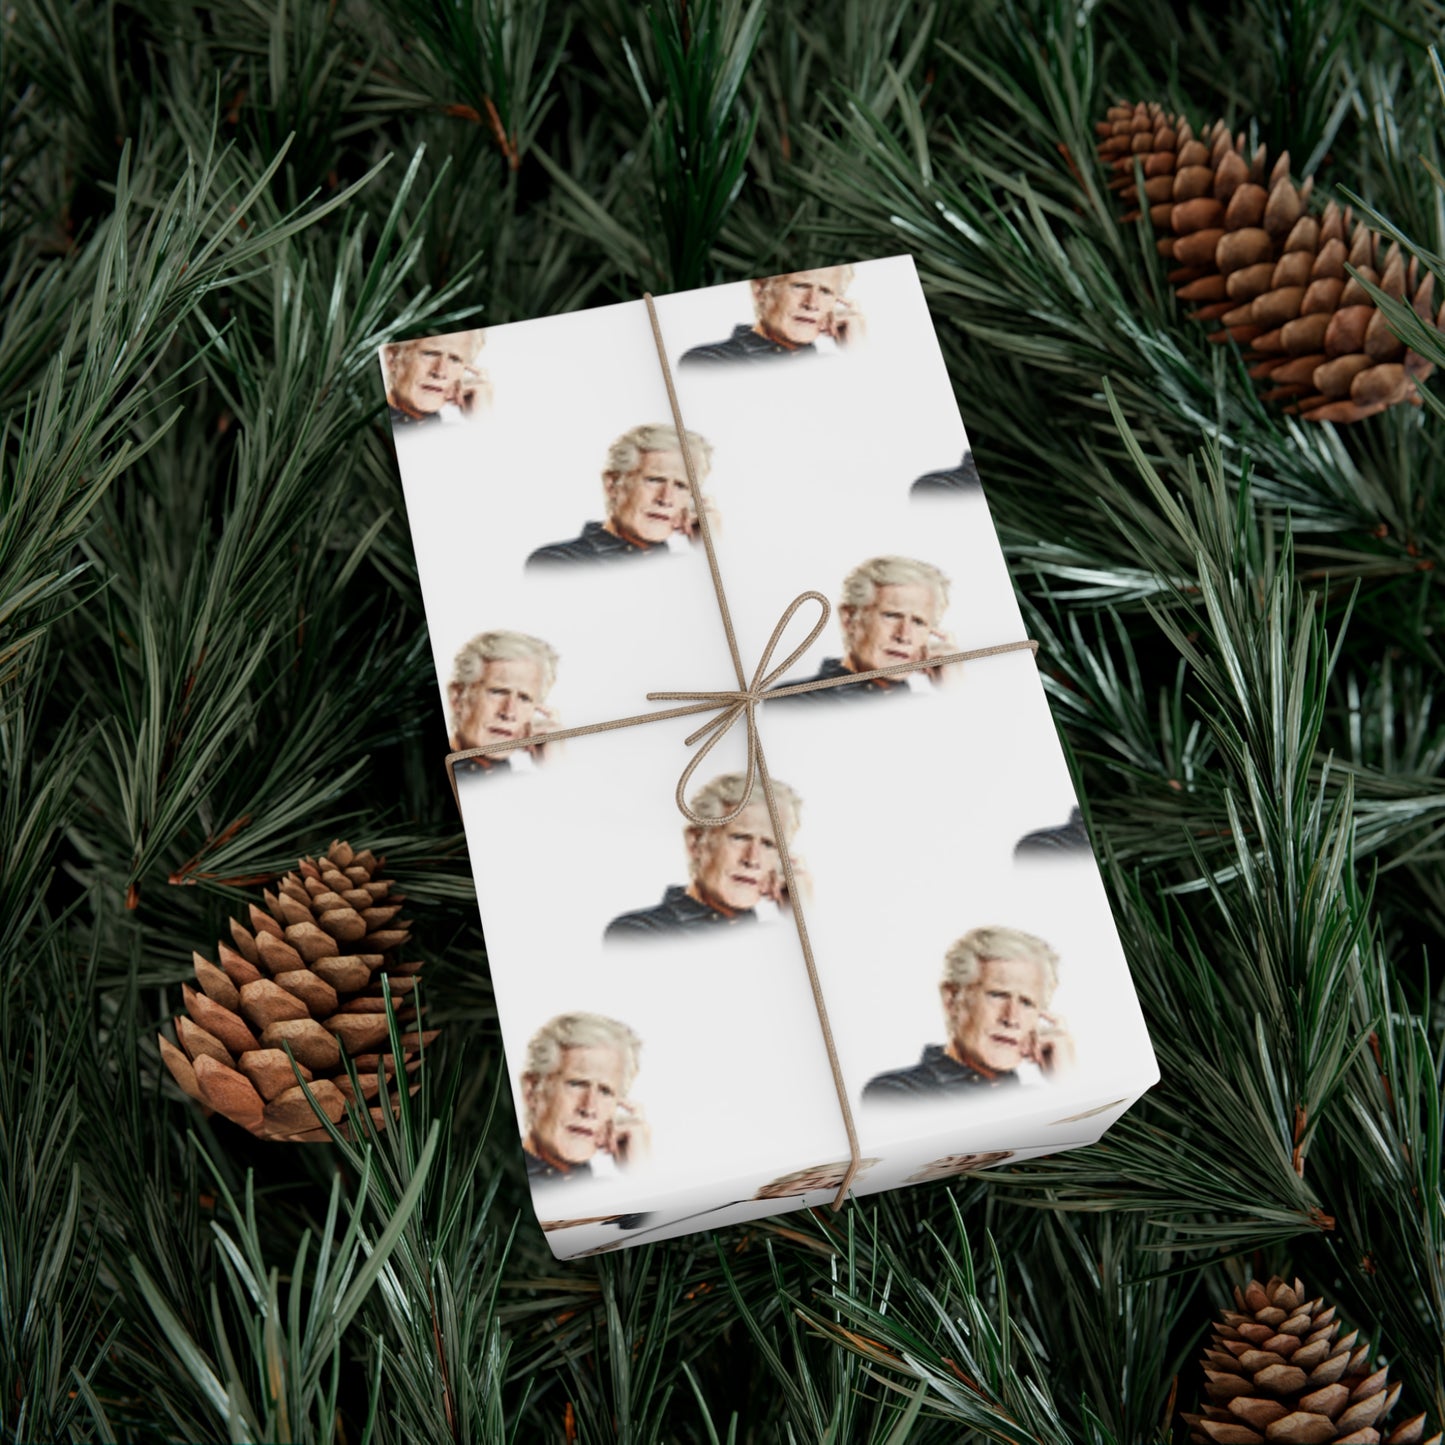 Dateline Keith Morrison Wrapping paper.